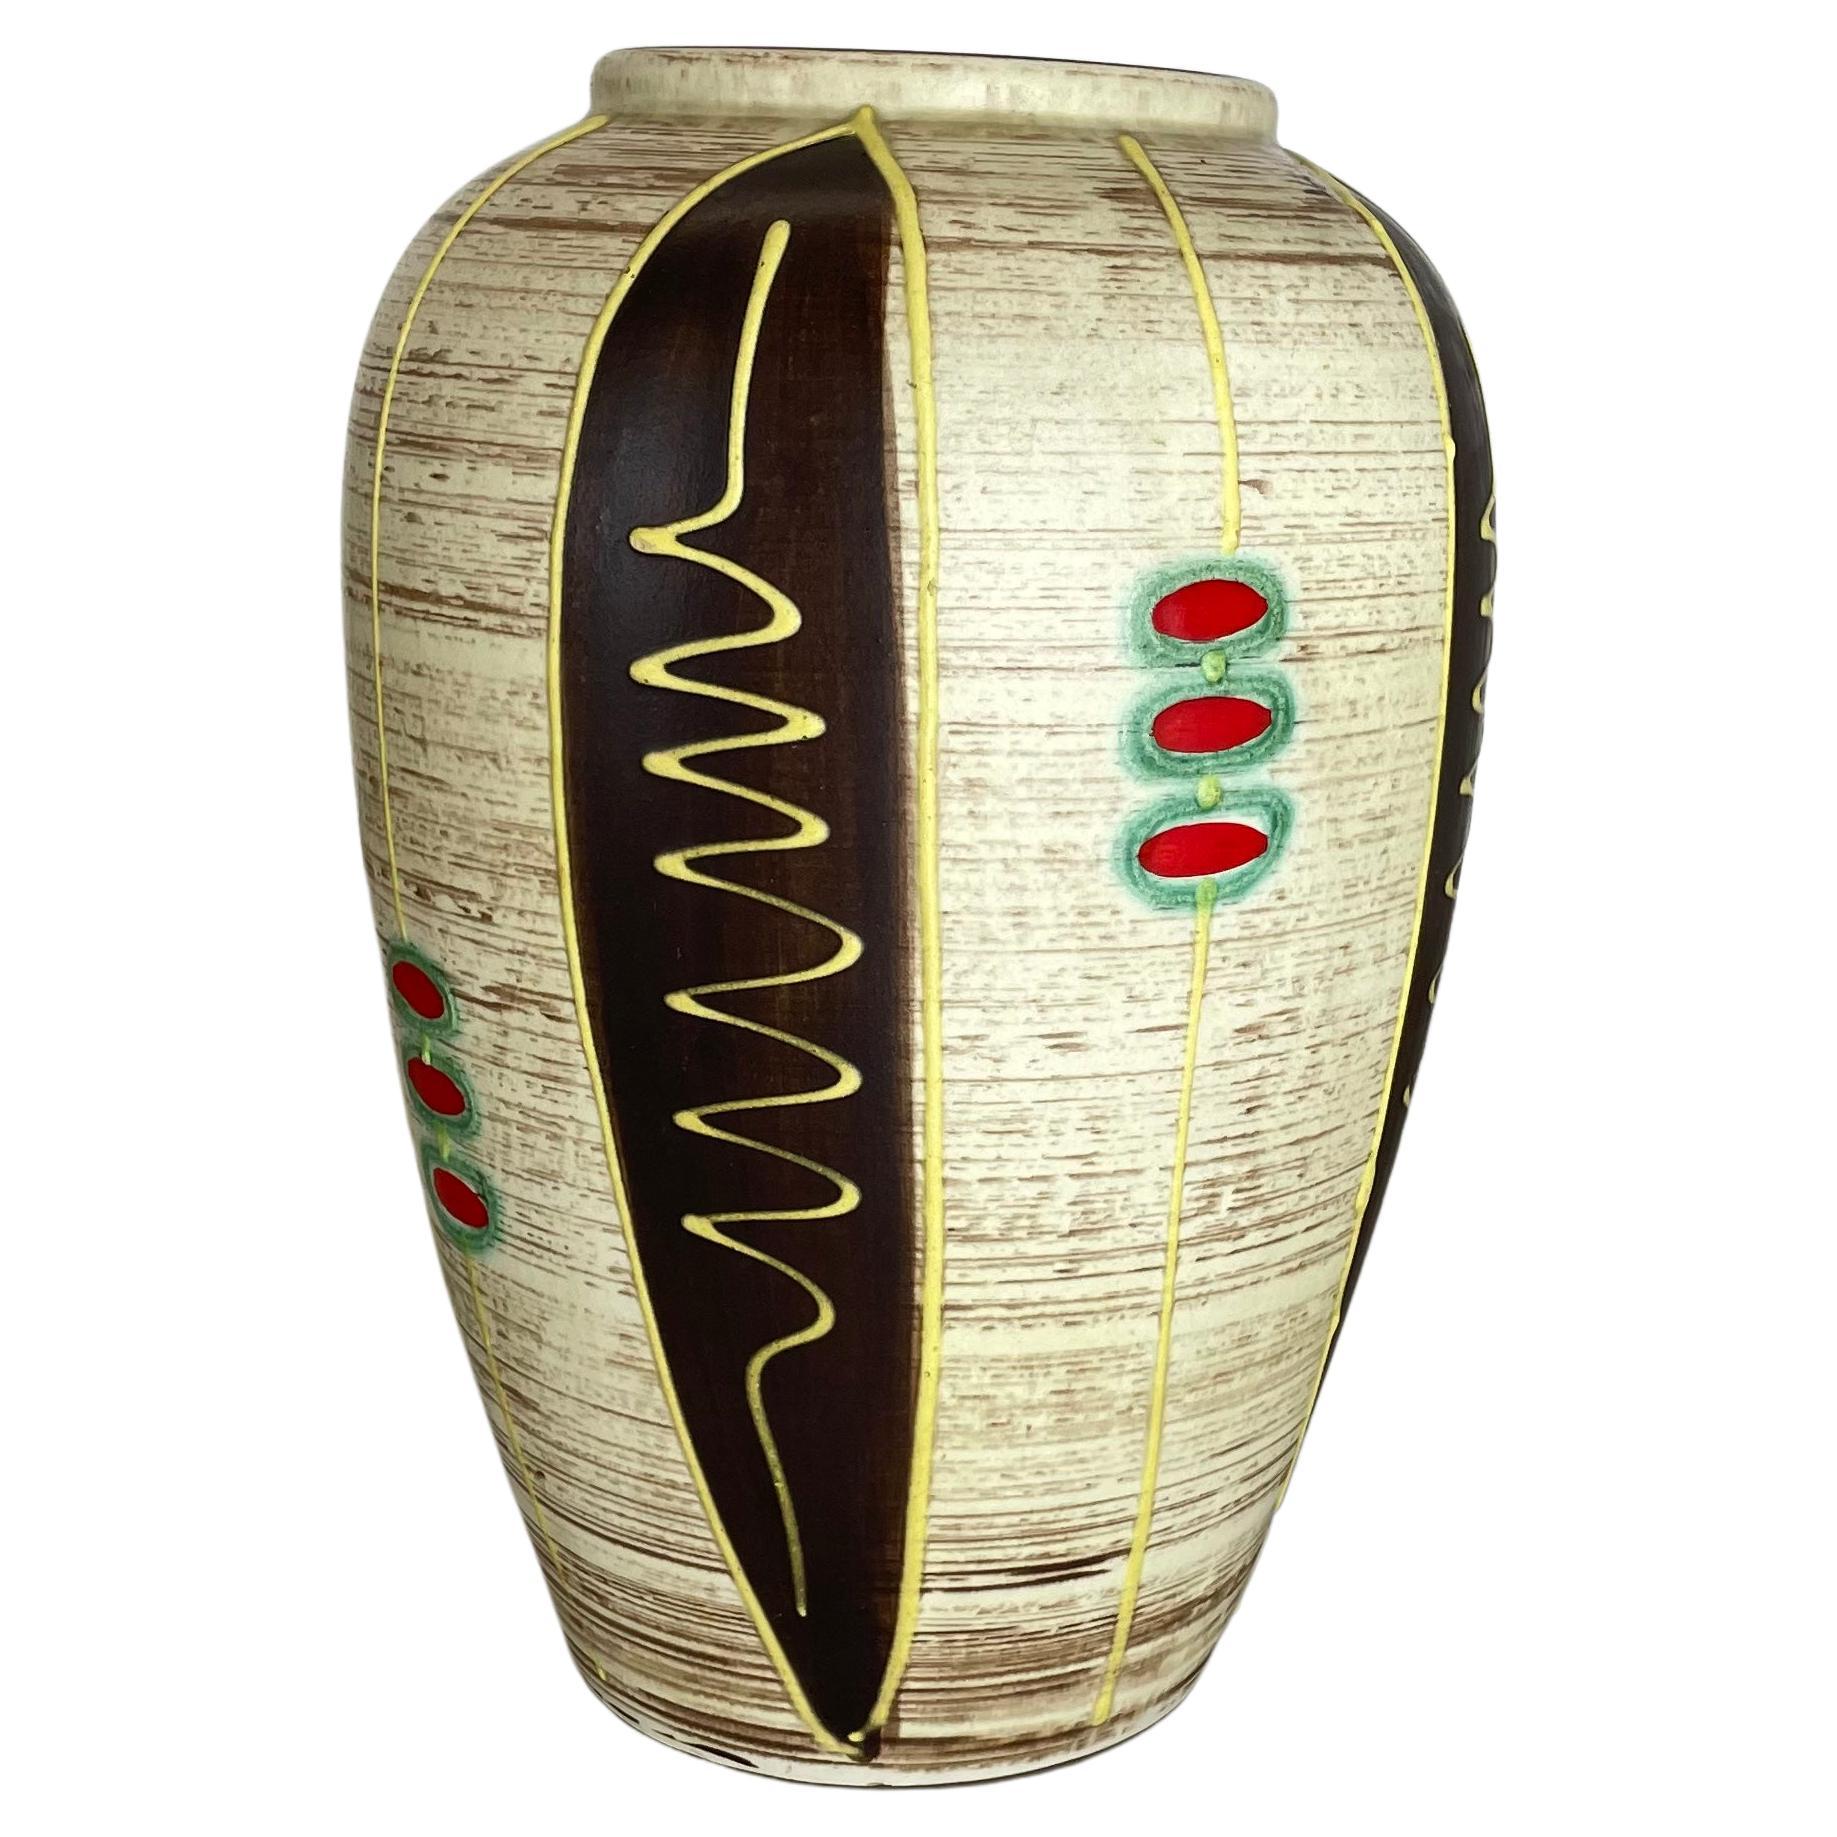 Colorful Fat Lava Pottery "Stripe and Dots" Vase Jasba Ceramics, Germany, 1950s For Sale